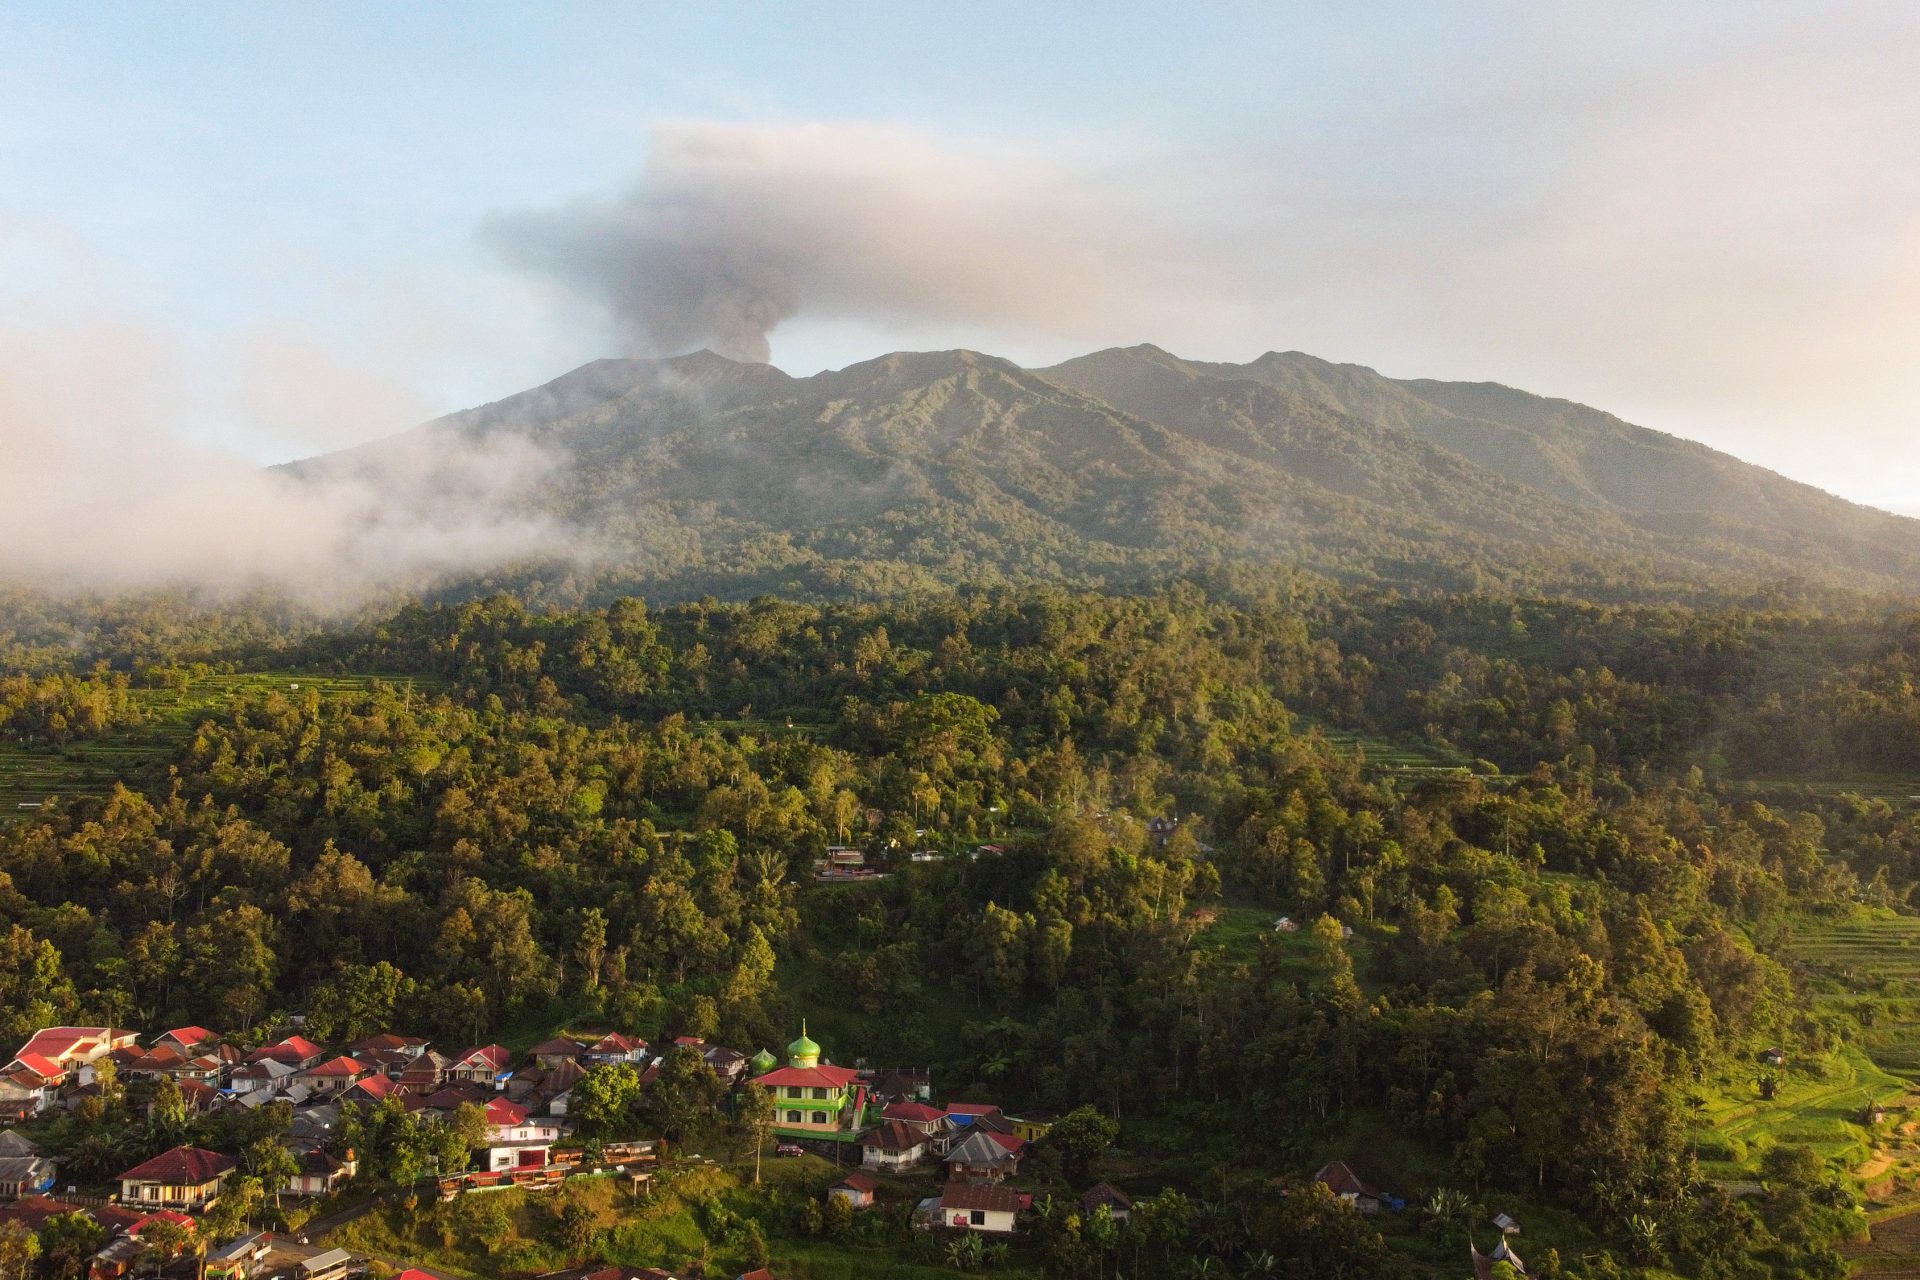 One of the most active volcanoes in the country